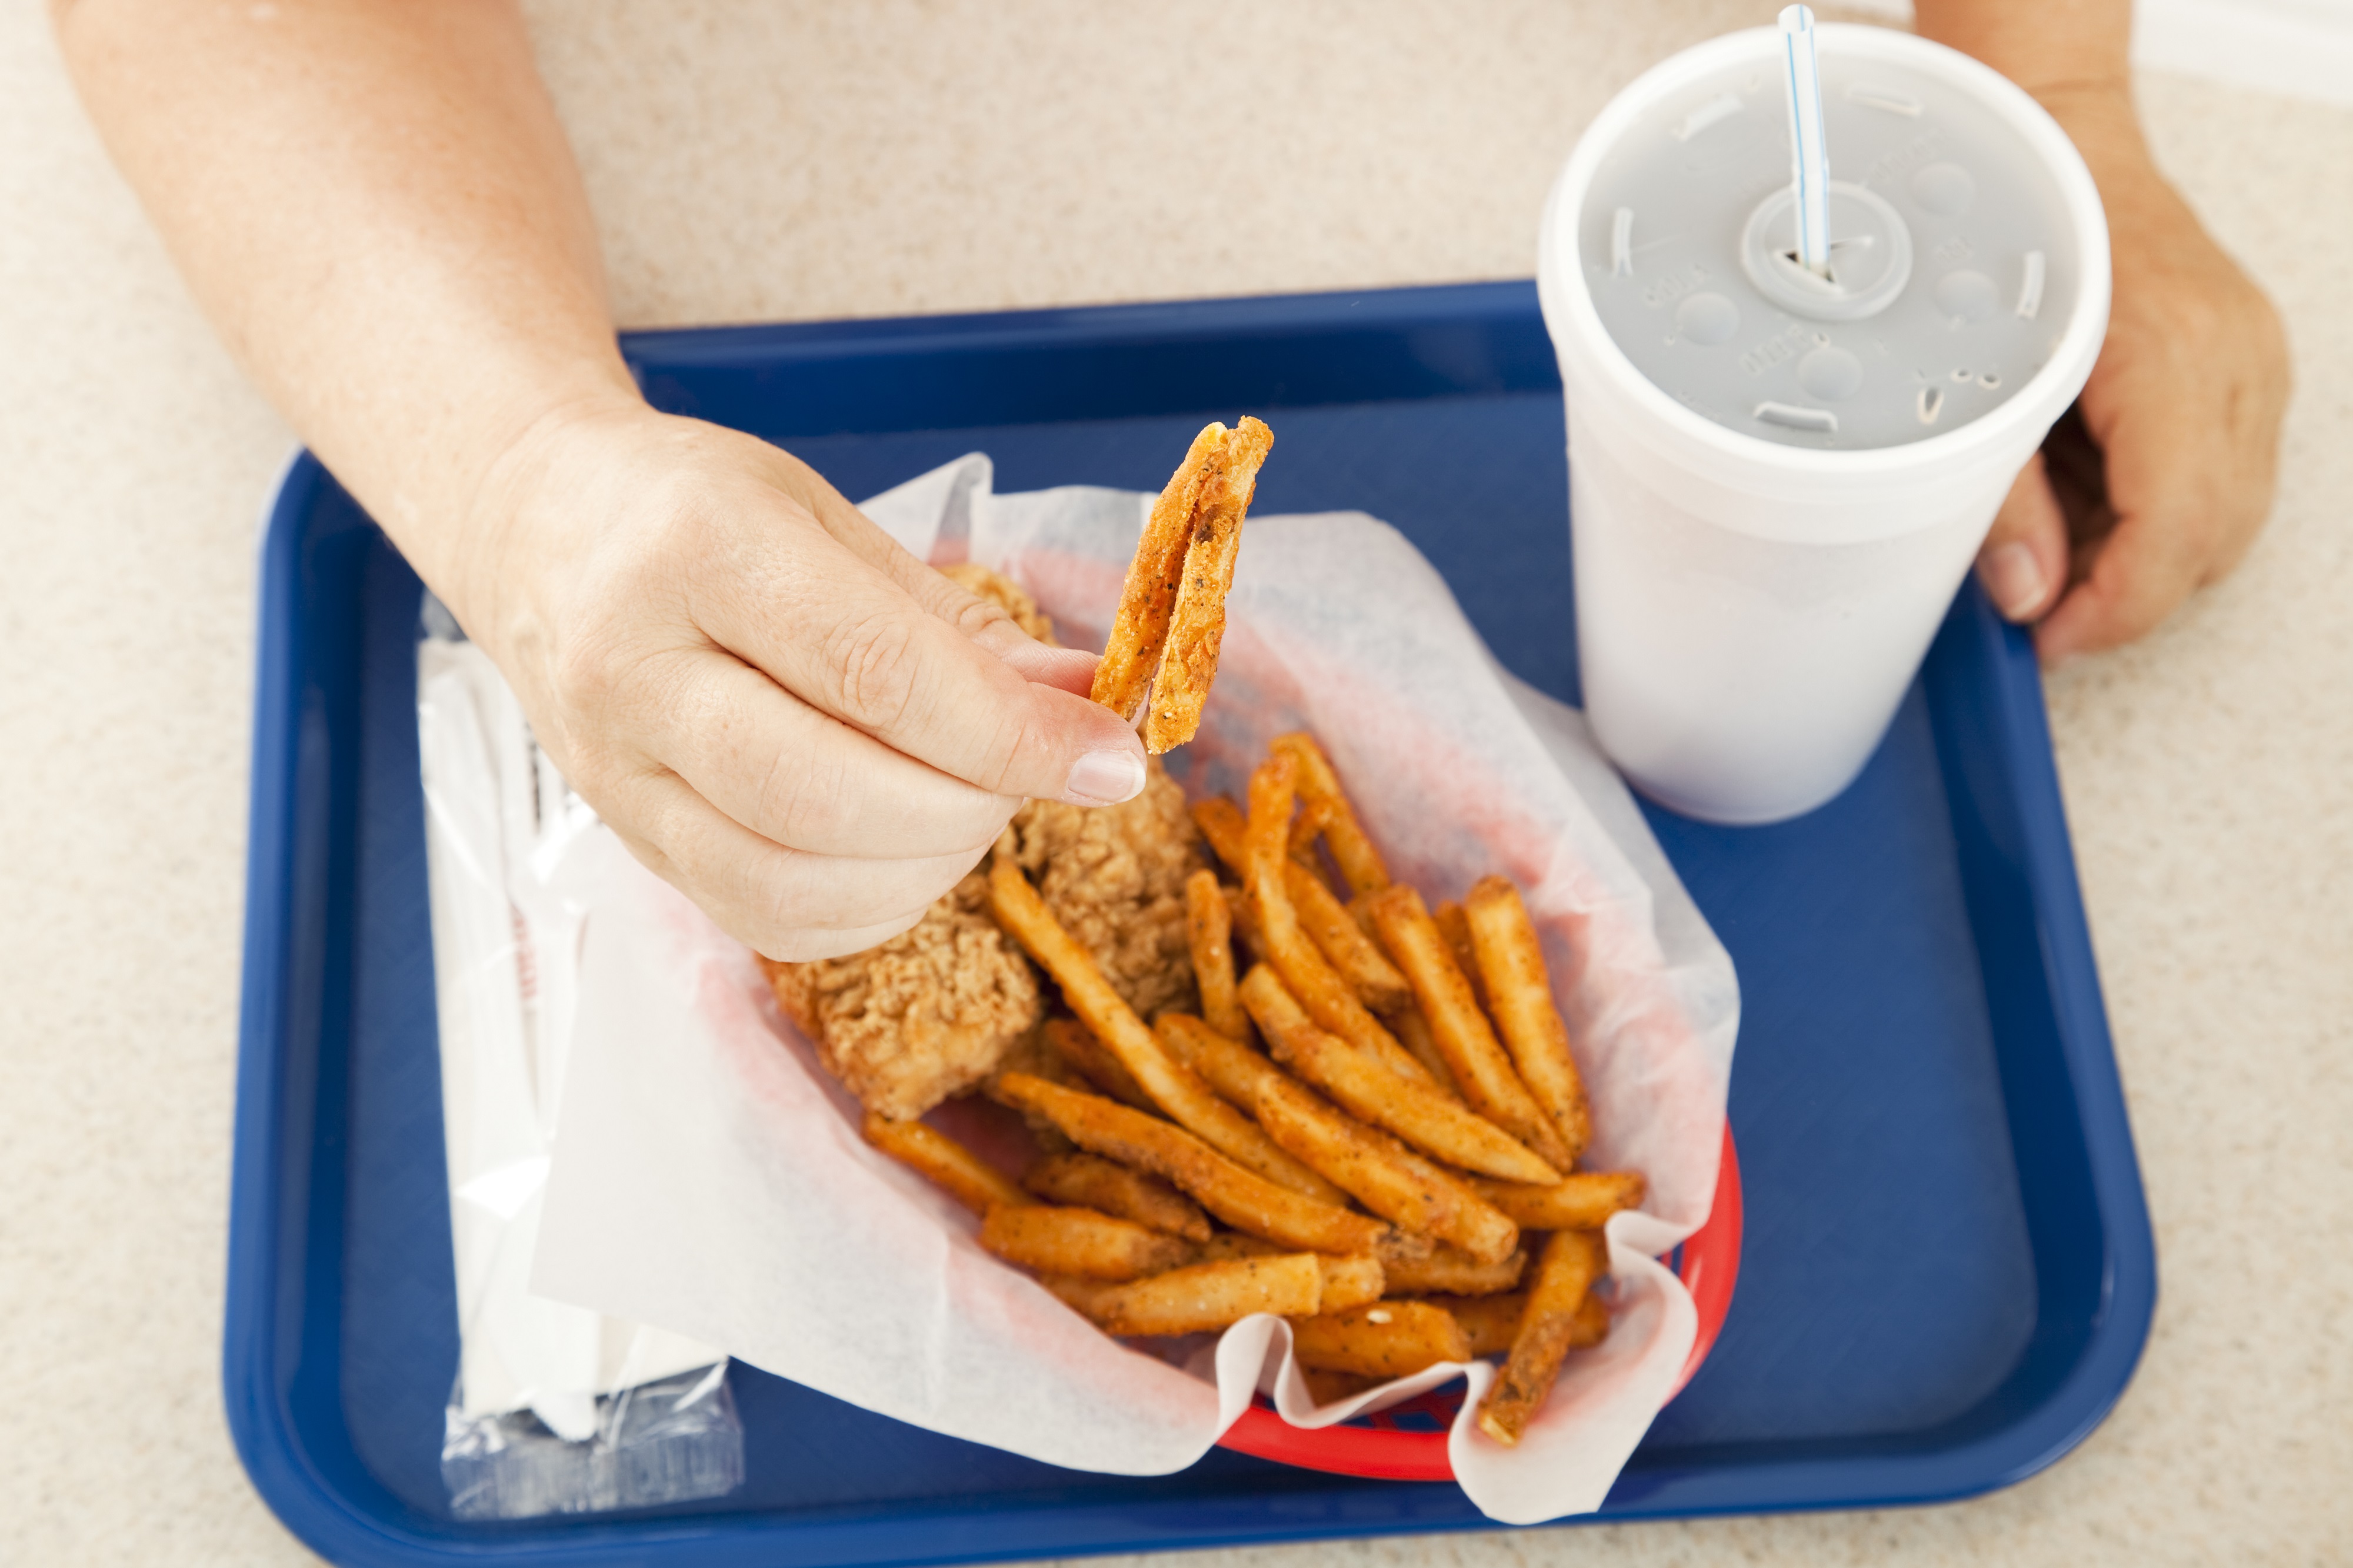 A plate of greasy fast food, with the customer holding up a greasy french fried potato to the camera.  Focus on the hand and the fry.